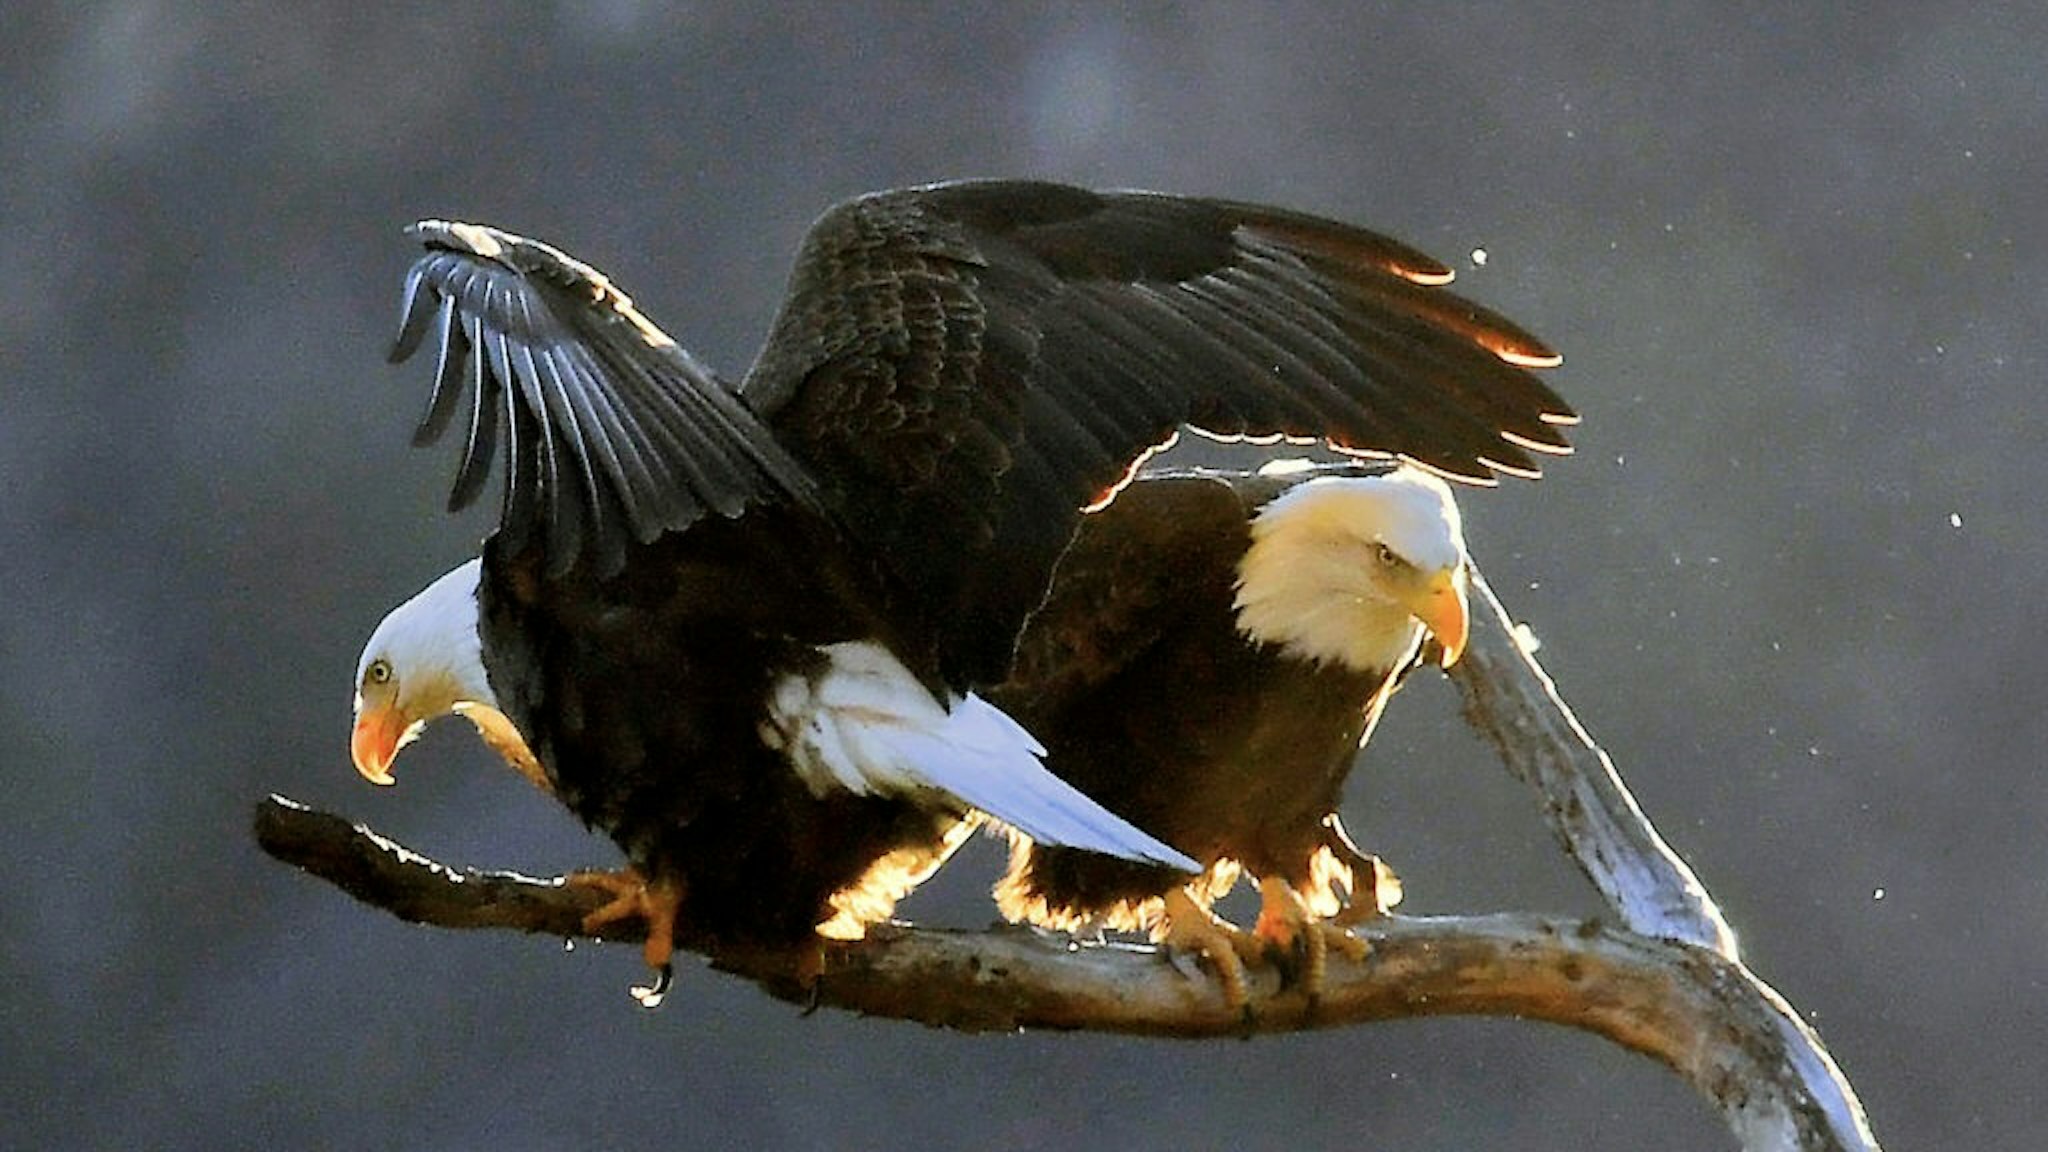 Contributor Archive - Travel Features 2022 Los Angeles, CA - January 05: Two American Bald Eagles seen at San Gabriel Reservoir on January 05, 2022 in Los Angeles, CA. (Photo by Nick Ut/Getty Images) Nick Ut / Contributor